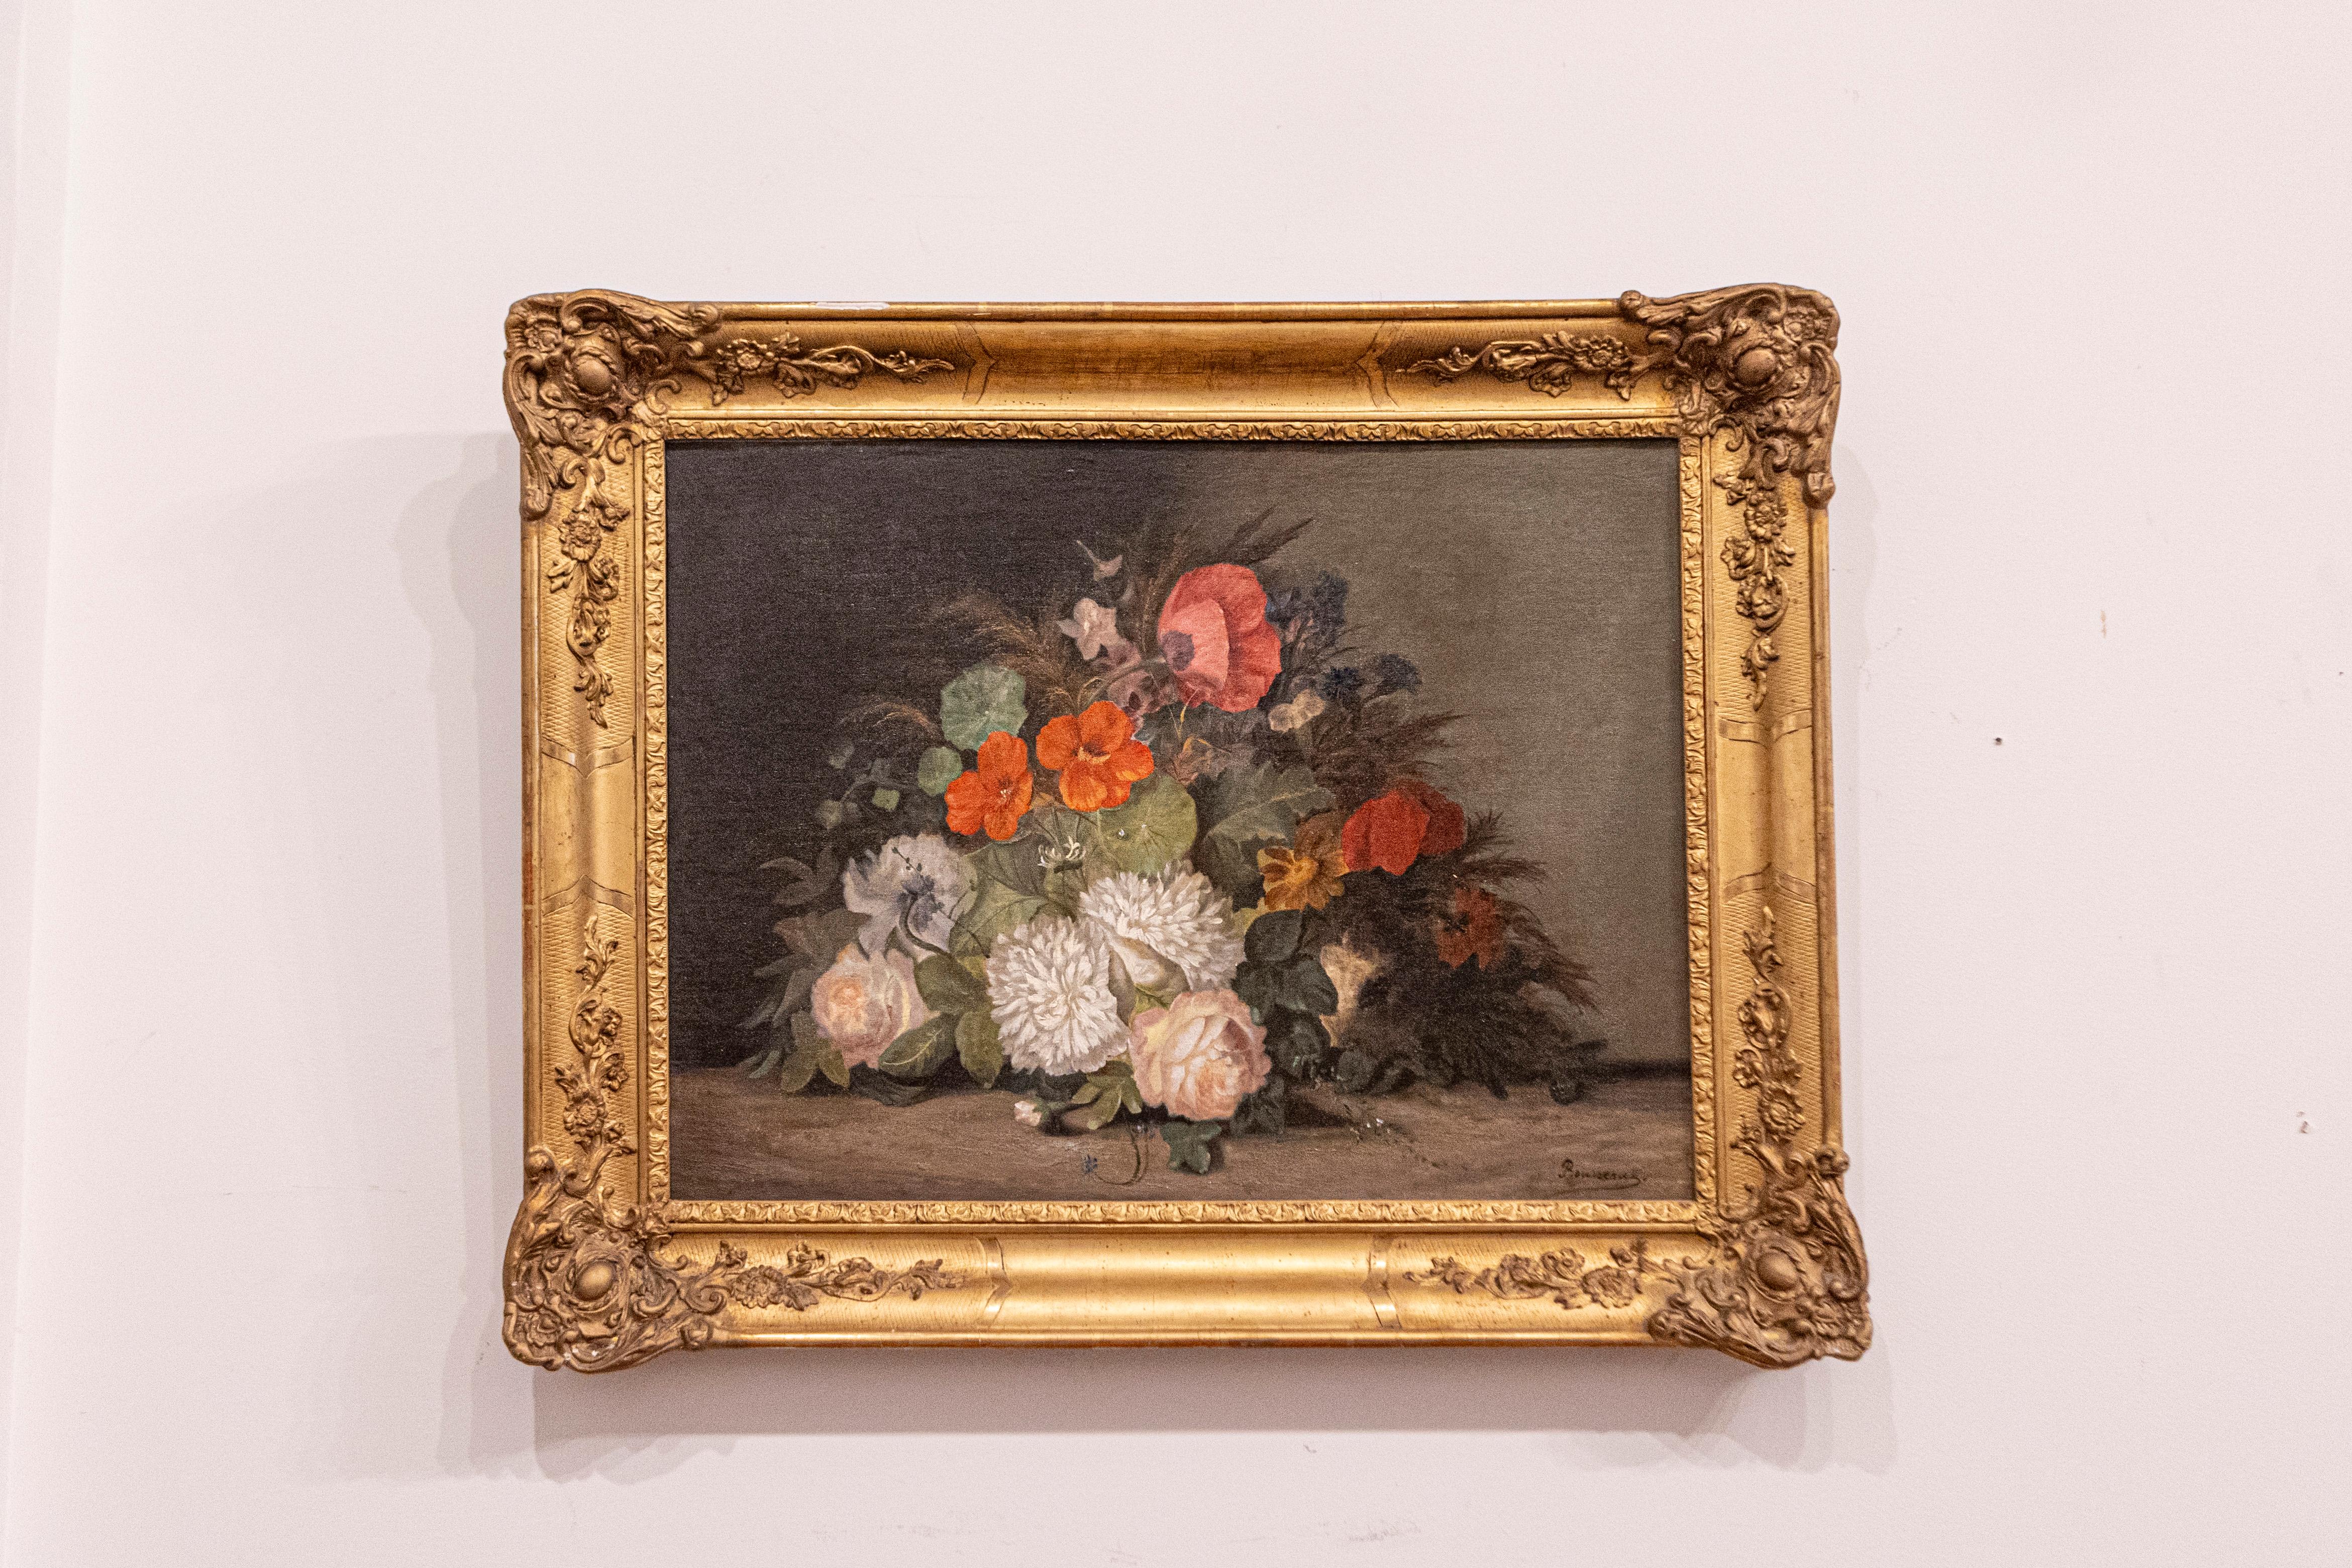 A 19th century framed oil on canvas floral painting signed by French artist Philippe Rousseau (1816-1887). This French still-life painting depicts an exquisite bouquet of flowers placed on a neutral background, in a manner resembling the production